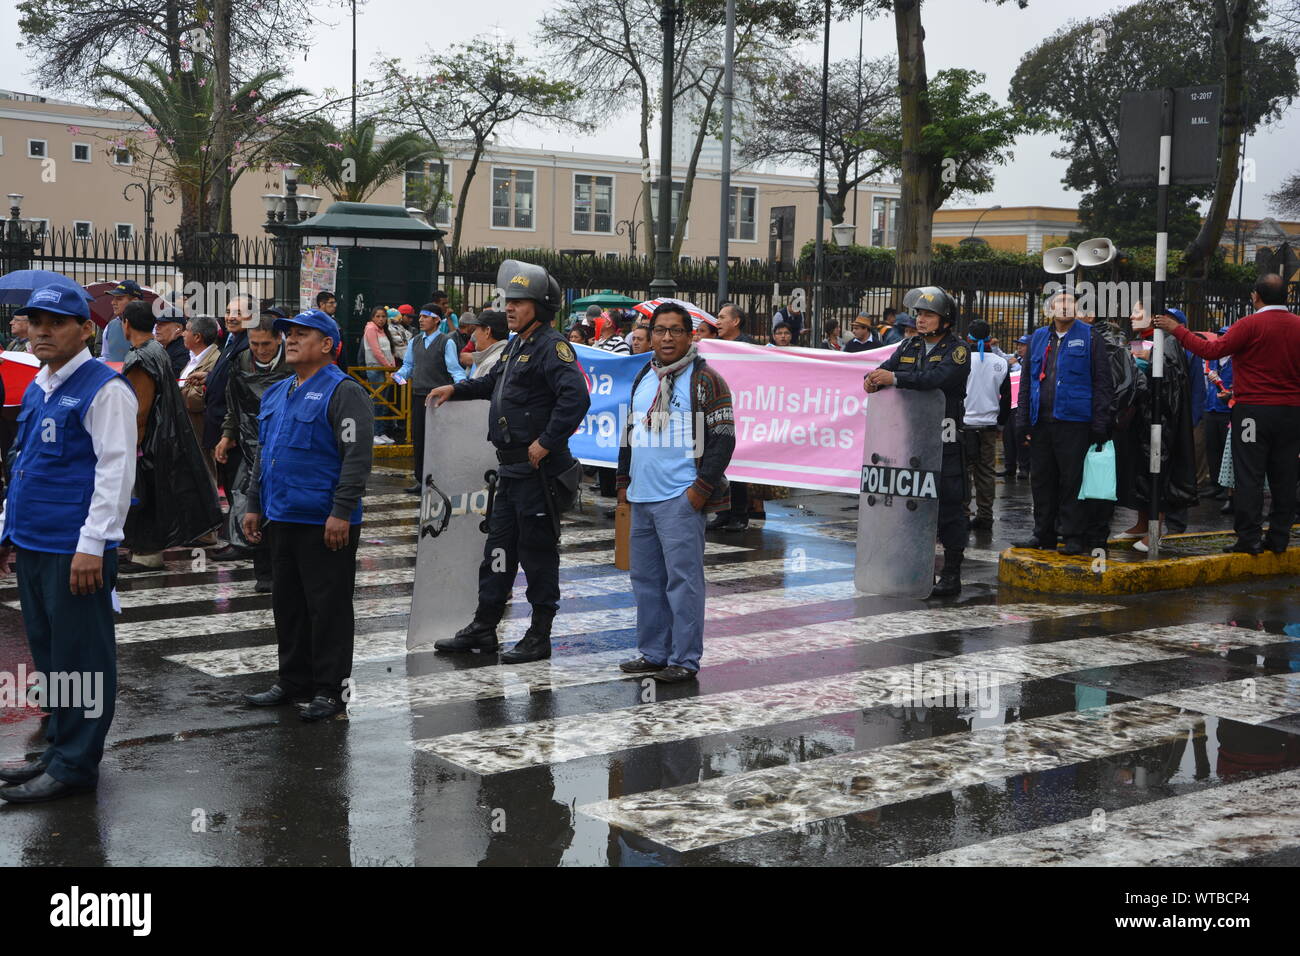 protest against the igaulity of gender in Lima Peru Stock Photo